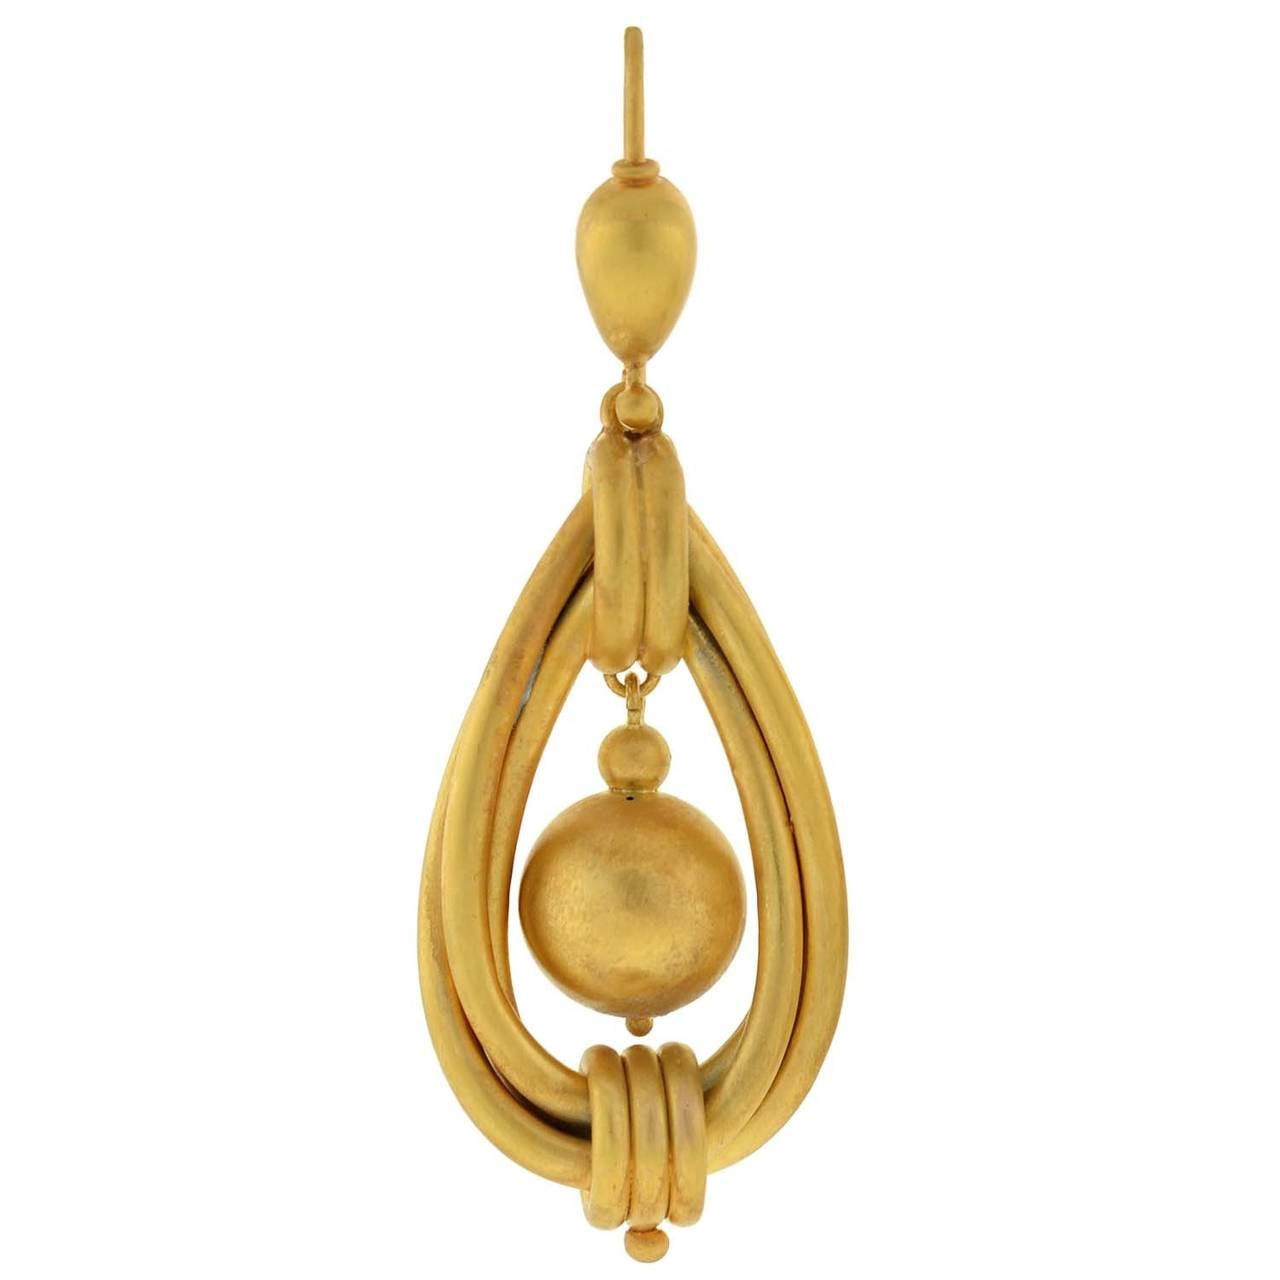 Absolutely fantastic gold earrings from the Victorian (ca1880) era! Each earring, which is particularly large in size, is made of vibrant 15kt yellow gold and is beautifully decorated with an unusual and lovely design. The earrings, which have a